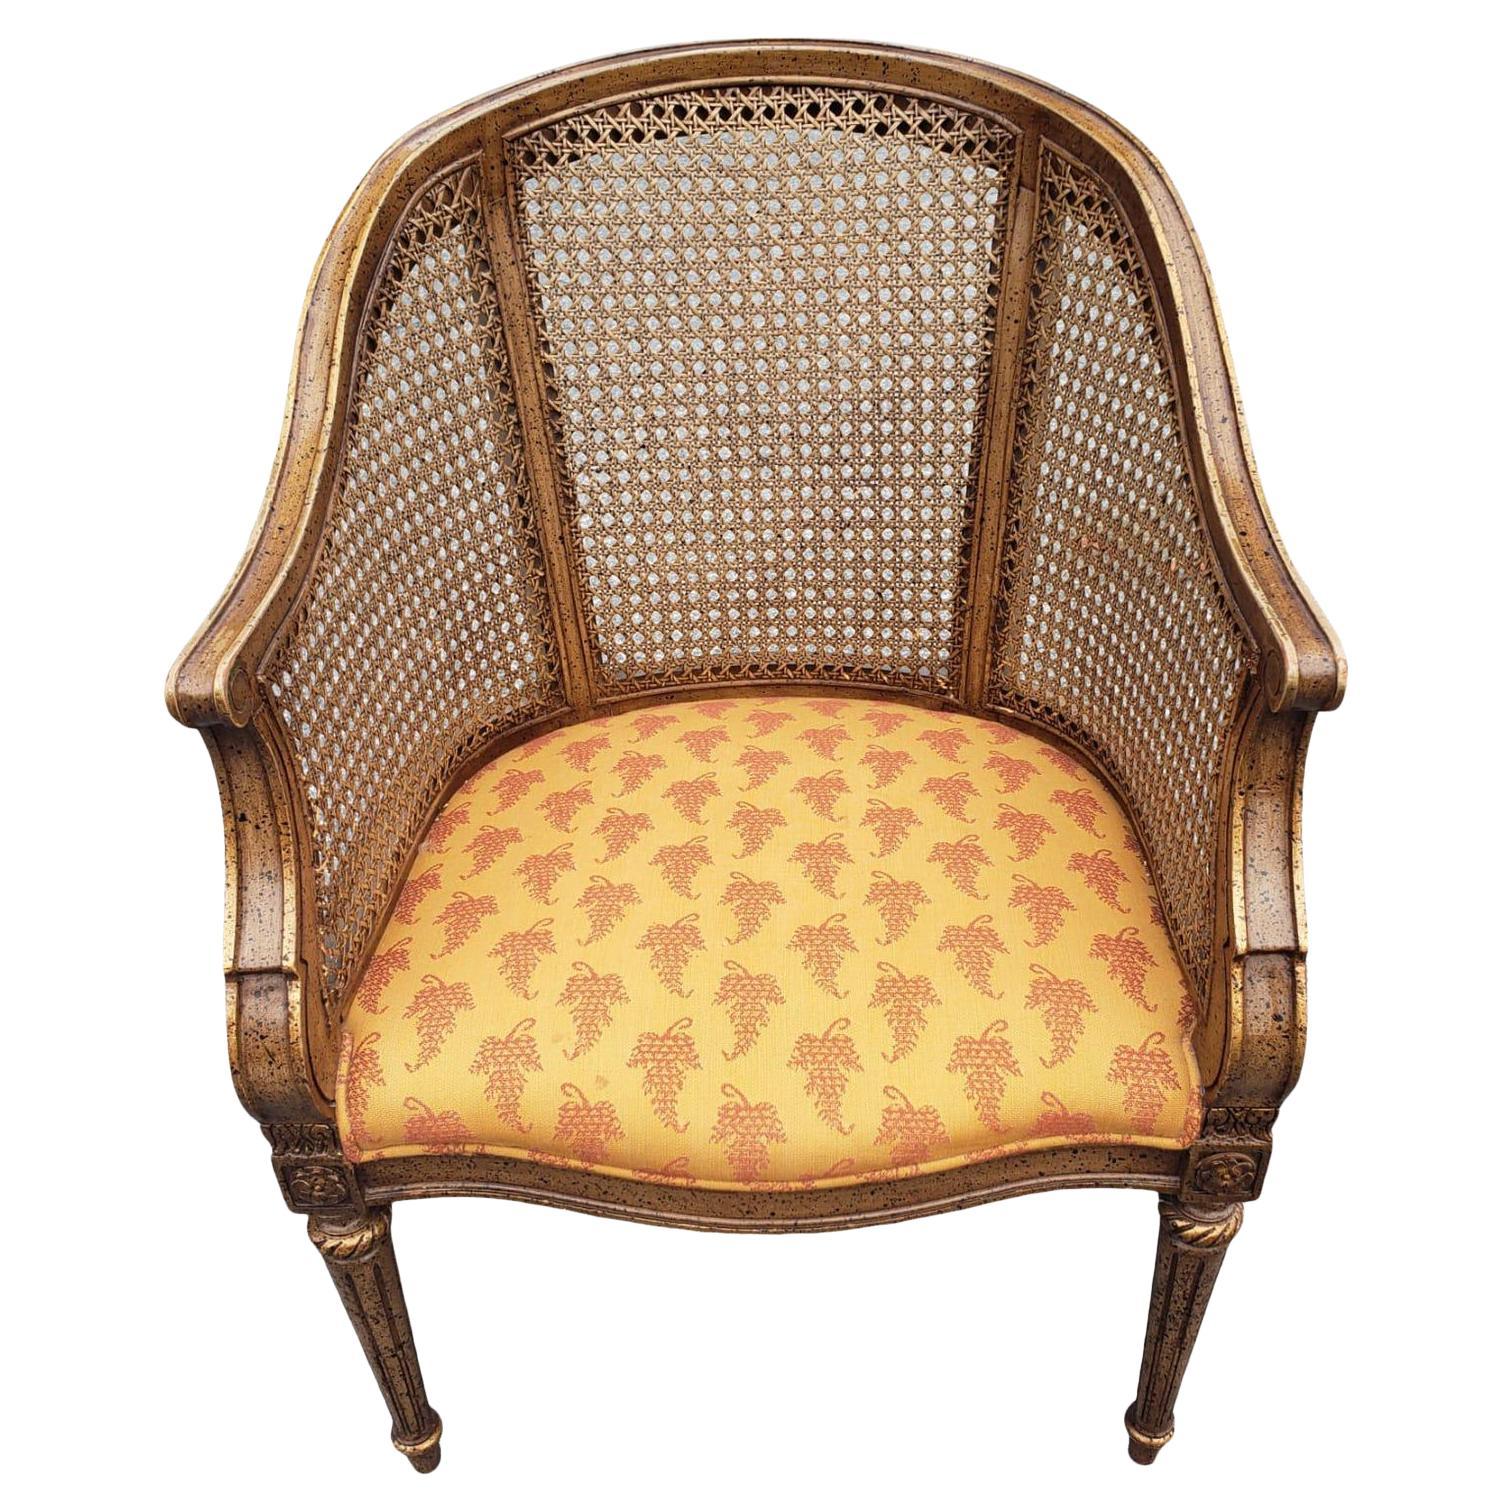 Vintage Giltwood Caning and Upholstery Chair with Woven Pattern For Sale